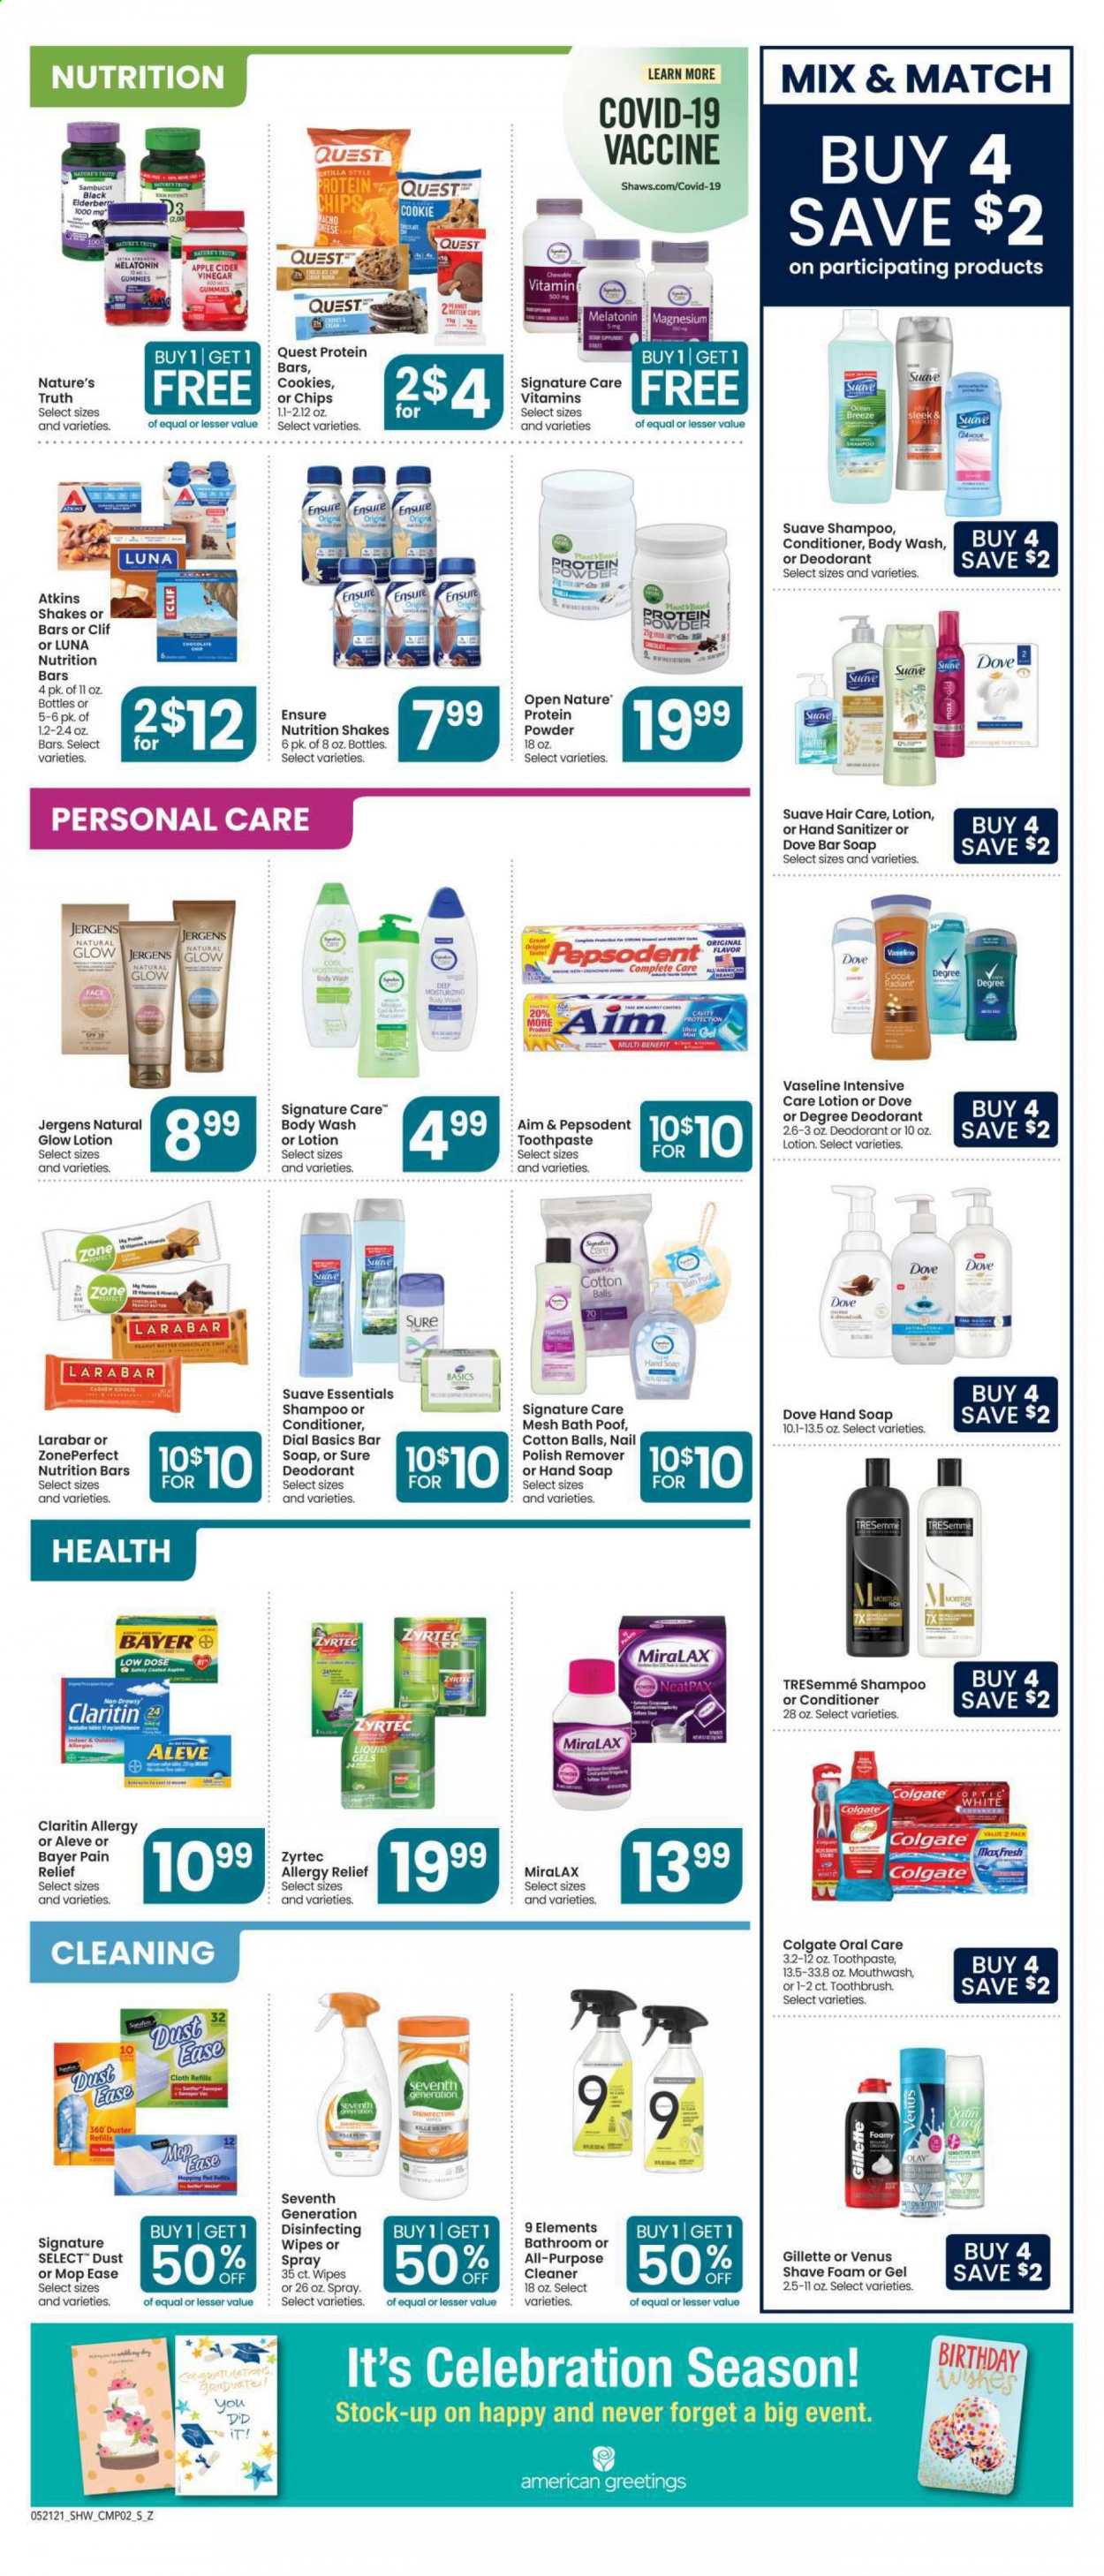 thumbnail - Shaw’s Flyer - 05/21/2021 - 05/27/2021 - Sales products - cheese, shake, cookies, Celebration, chips, nutrition bar, cider, wipes, cotton balls, cleaner, body wash, Dove, shampoo, Suave, hand soap, Vaseline, soap bar, Dial, soap, Colgate, toothbrush, toothpaste, mouthwash, Pepsodent, Olay, conditioner, TRESemmé, body lotion, Jergens, anti-perspirant, Sure, deodorant, Gillette, Venus, mop, duster, cup, Aleve, magnesium, Melatonin, MiraLAX, Nature's Truth, Zyrtec, pain relief, whey protein, vitamin D3, Low Dose, Bayer, allergy relief. Page 6.